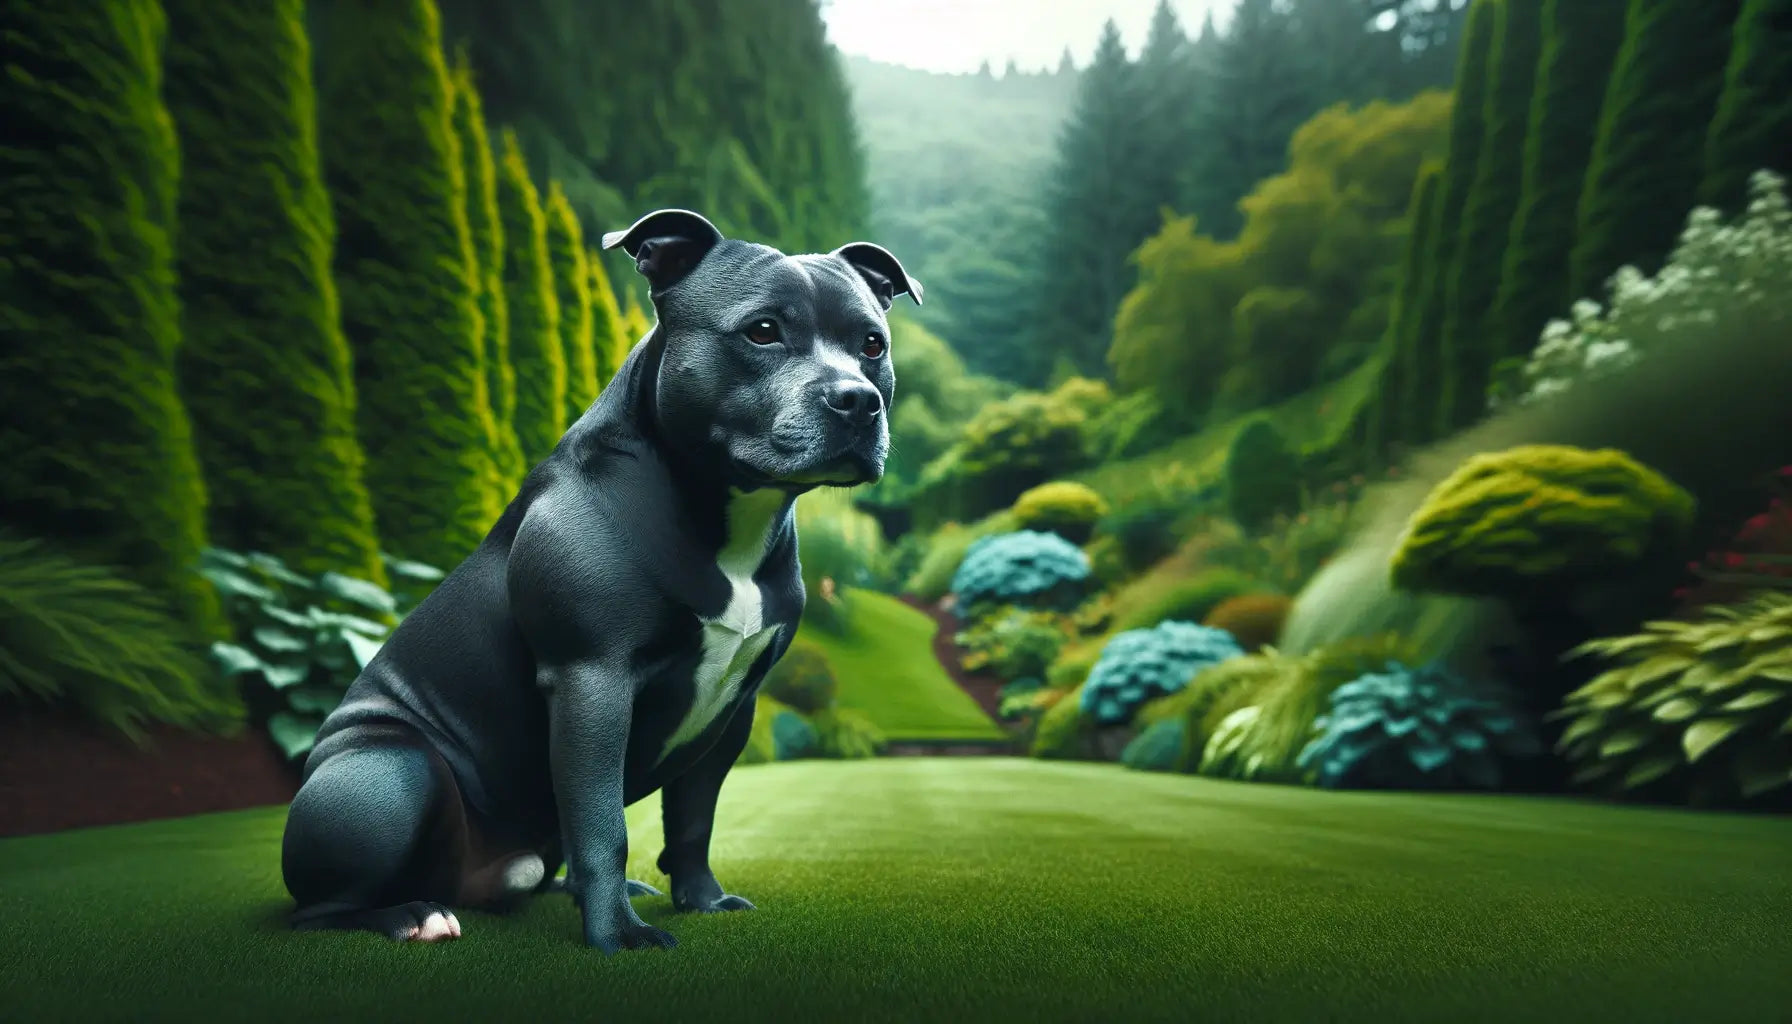 Blue Staffy sitting on a well-manicured lawn with a backdrop of lush greenery.